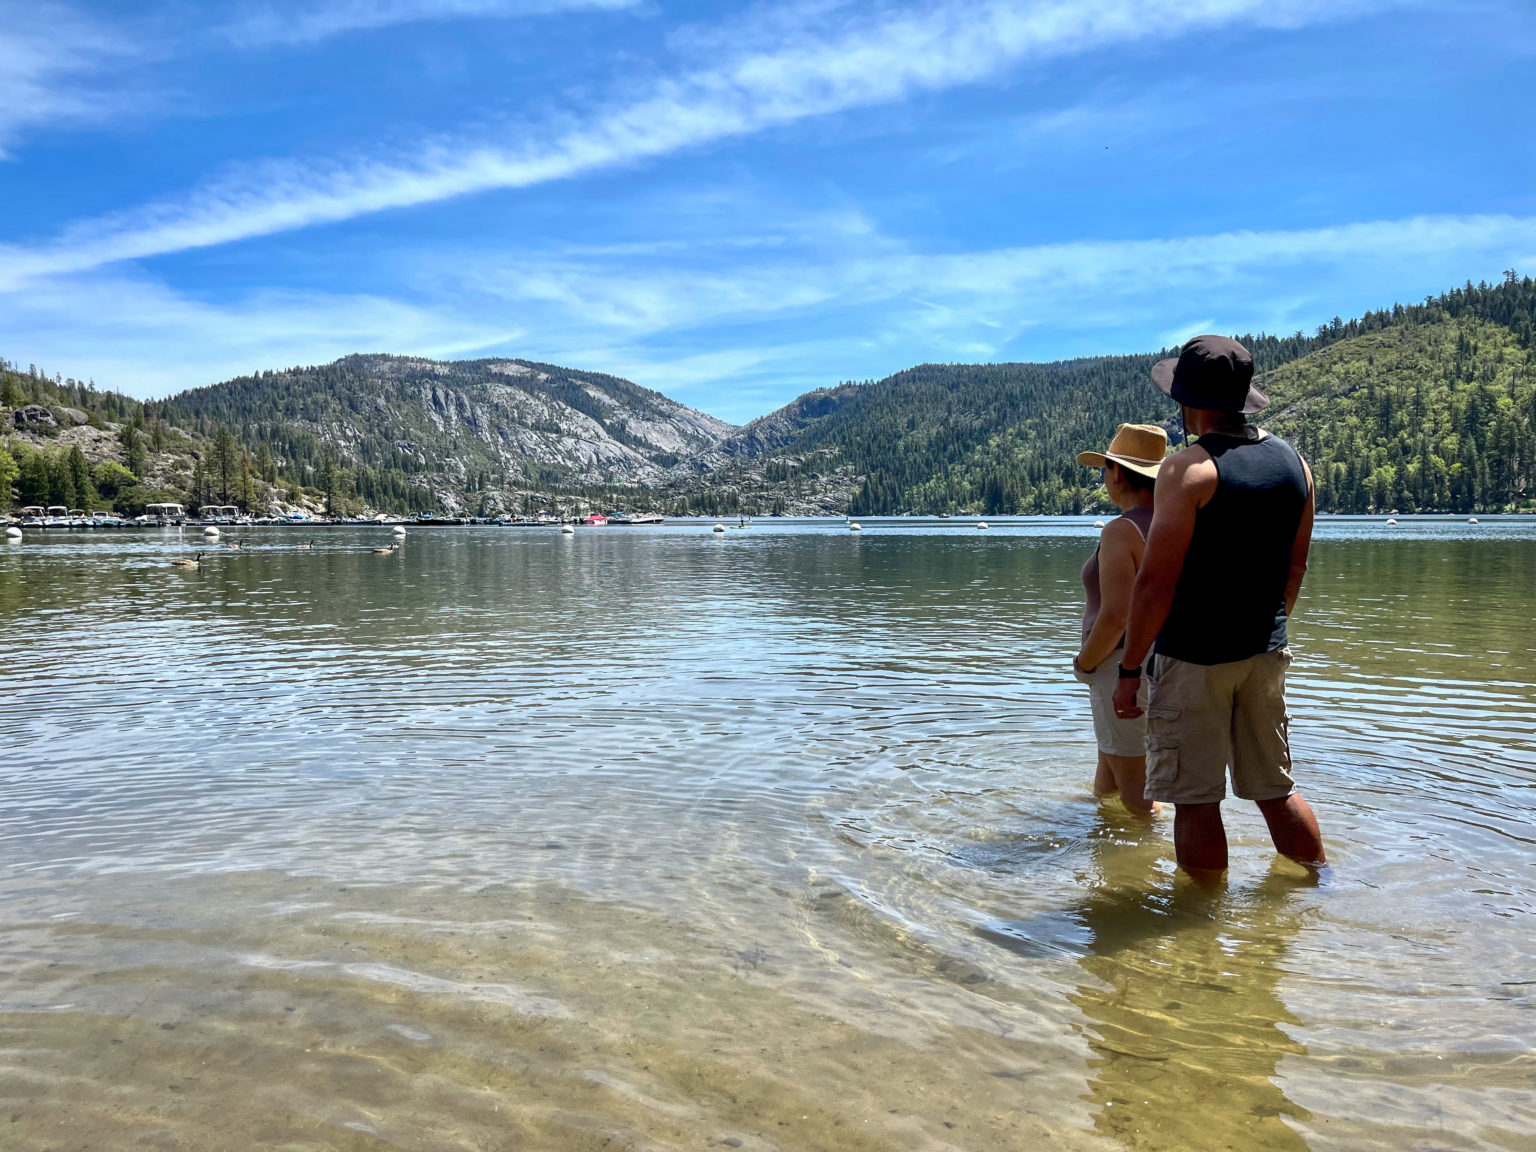 Two people standing in a lake admiring the mountains